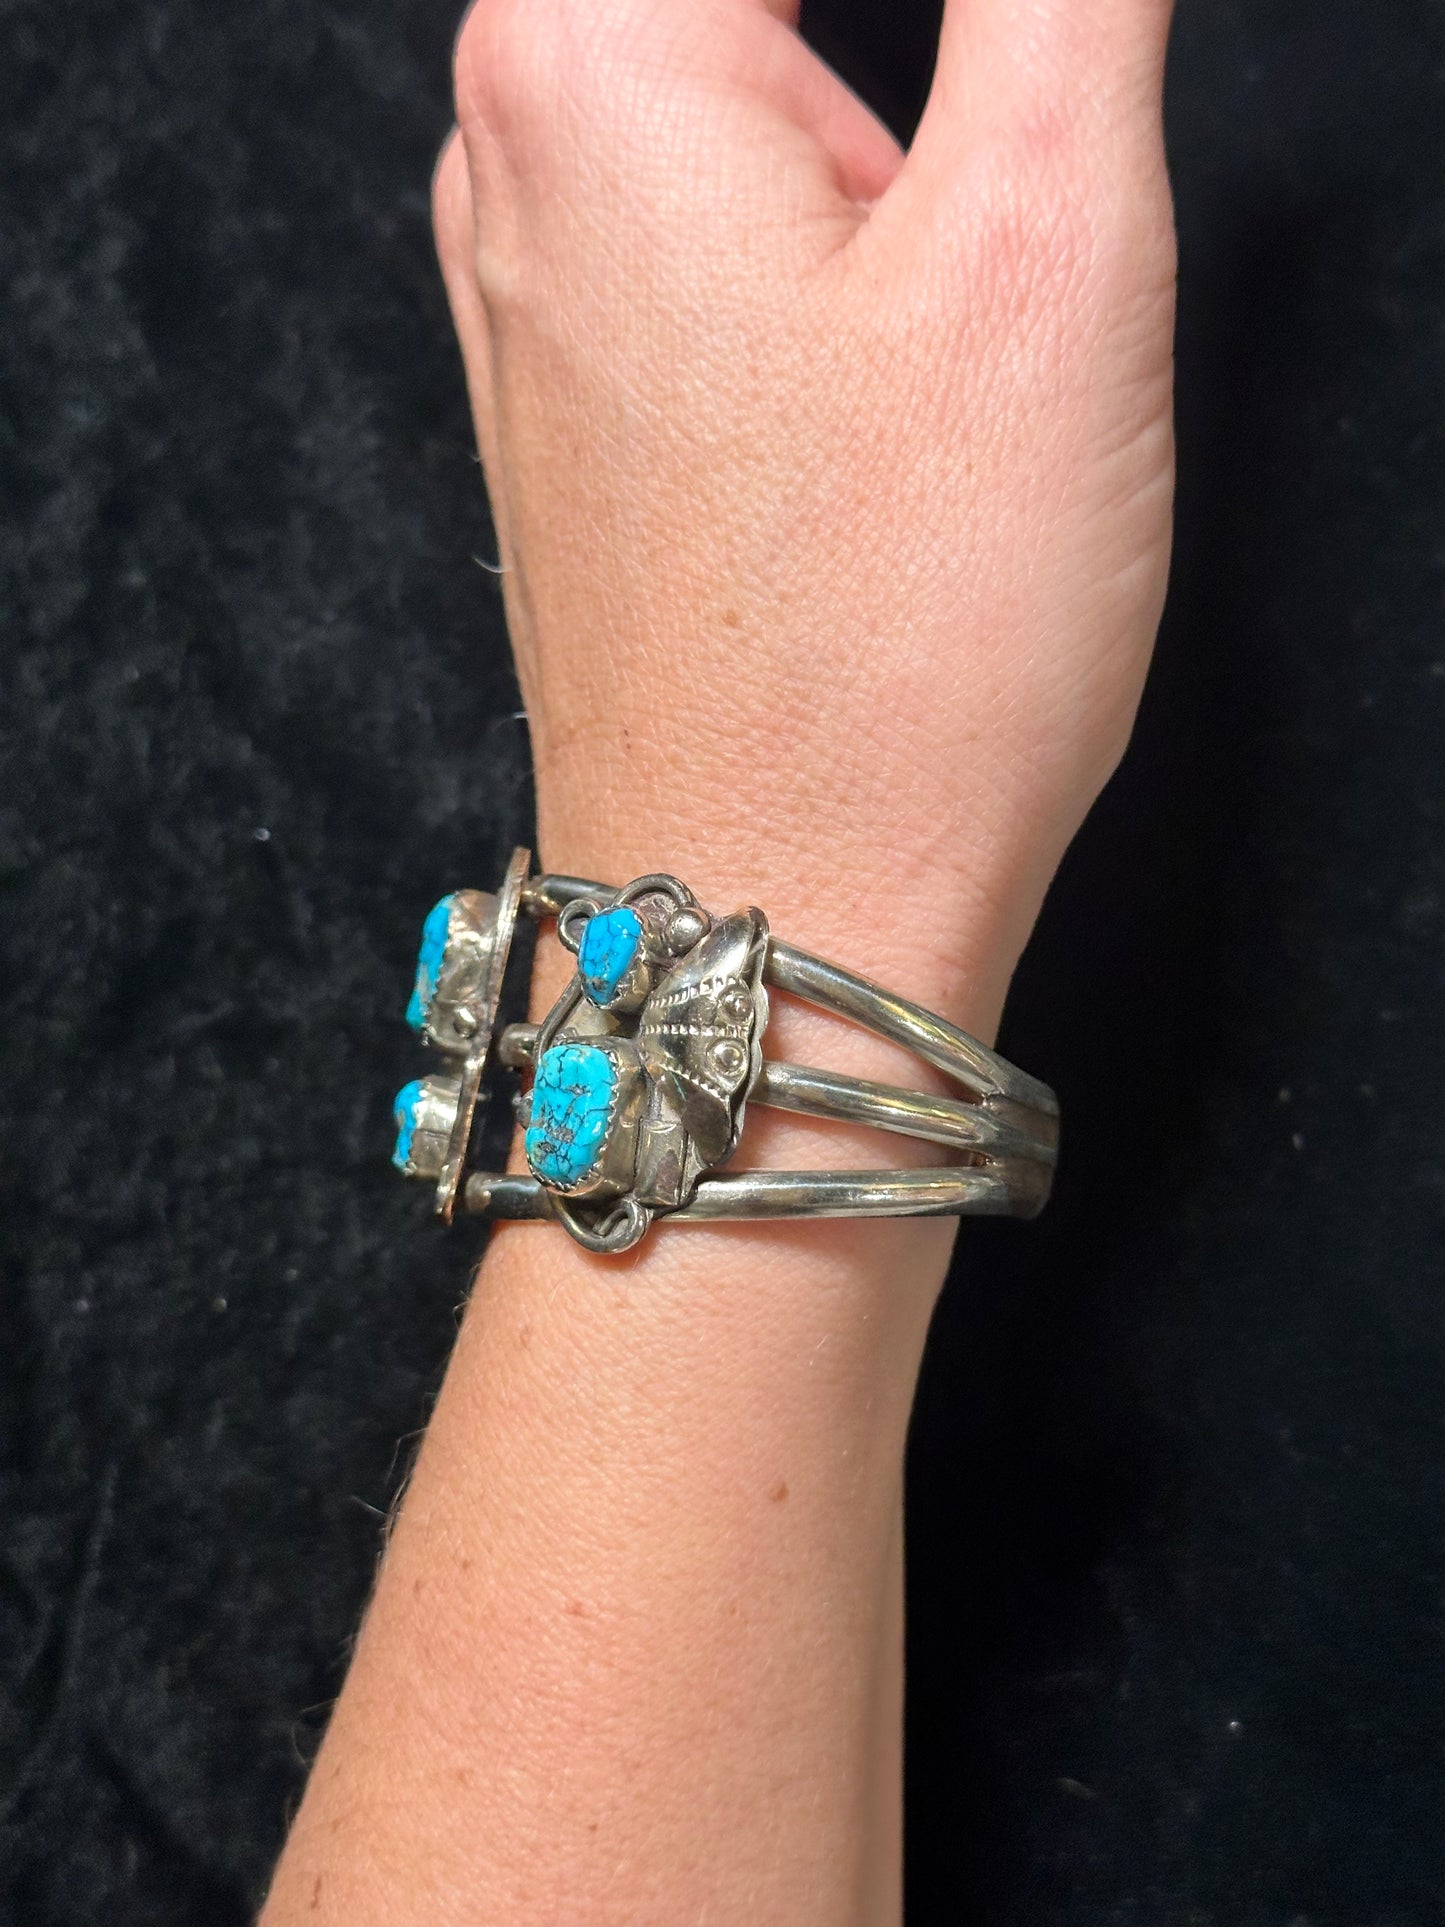 6.5” Vintage Kingman Turquoise and Sterling Silver Cuff (No flex)